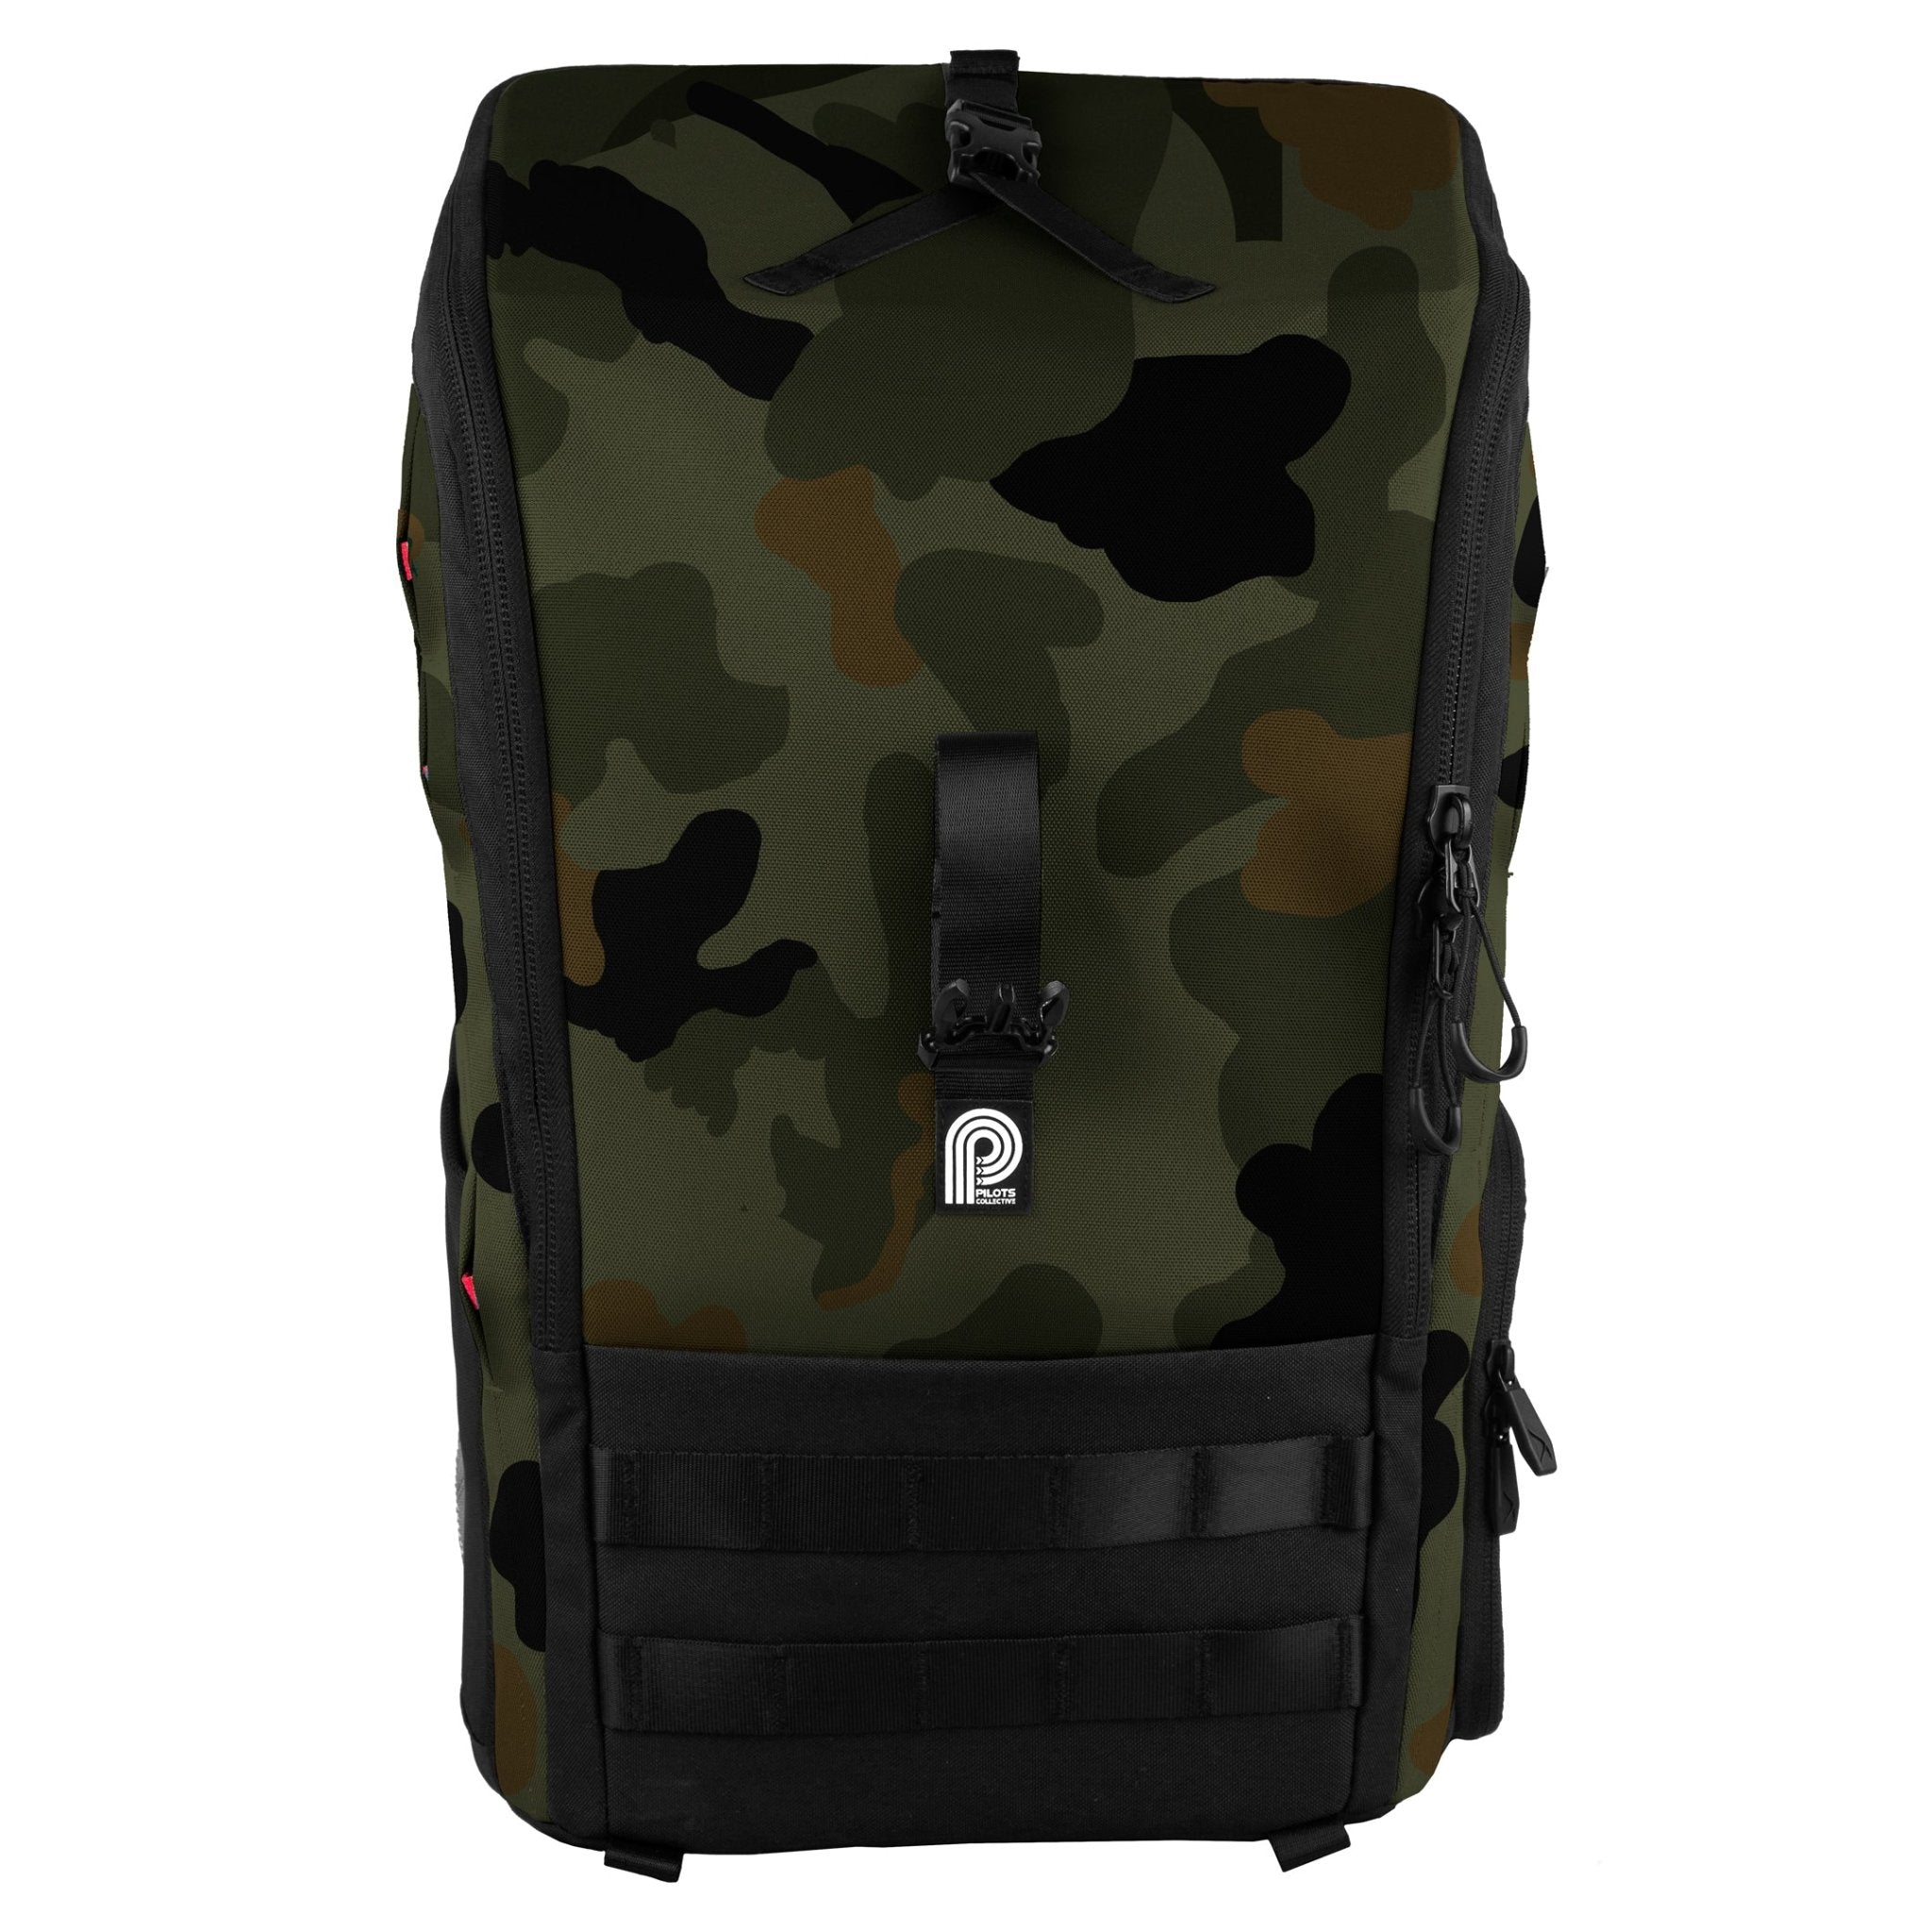 Torvol Urban Carrier Backpack - Your All-Round Freestyle Backpack 22 - Torvol - Drone Authority